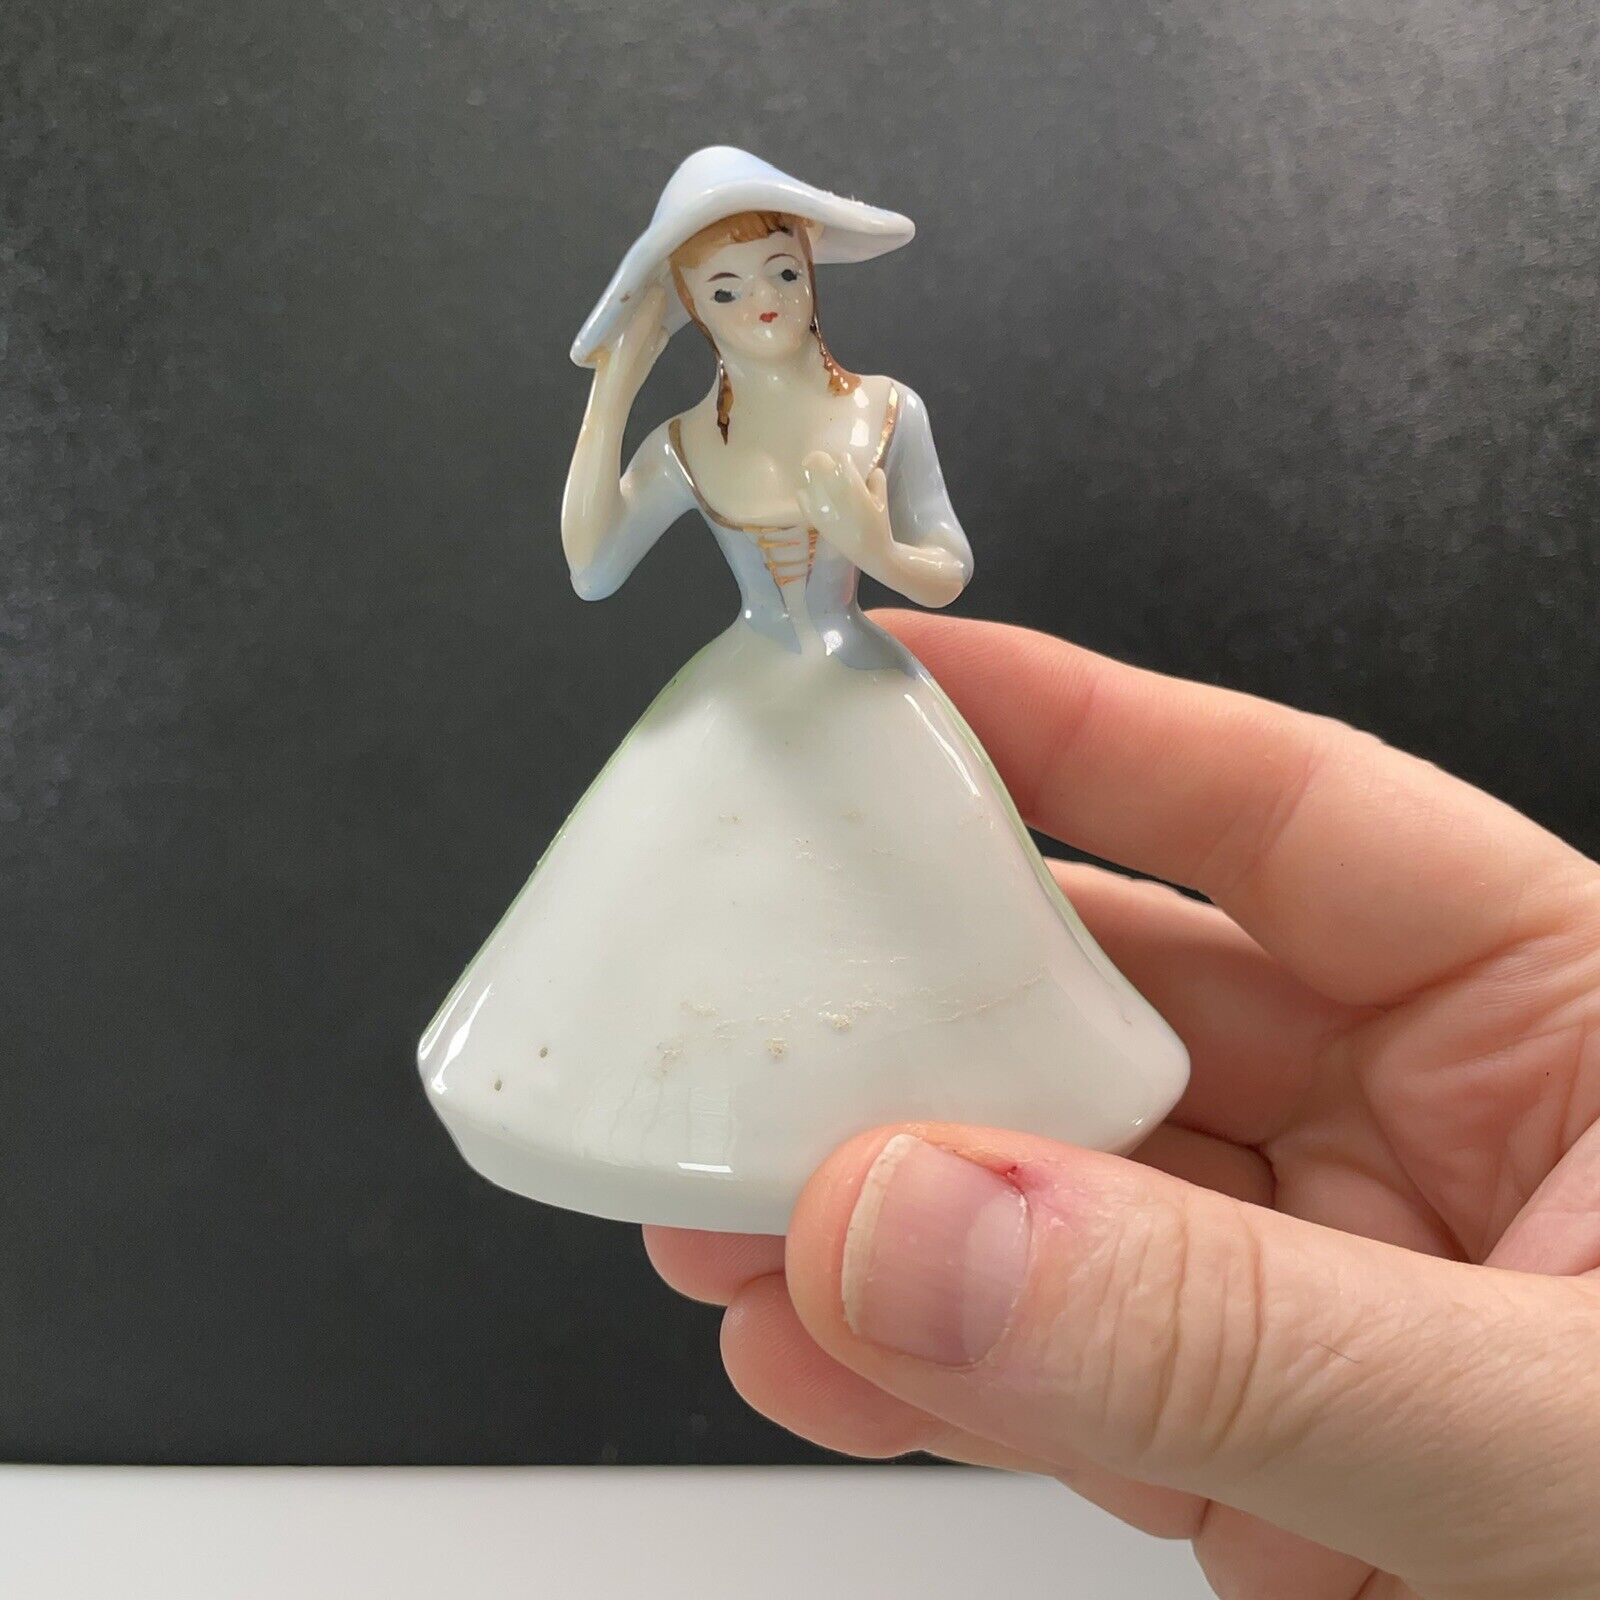 ❤️ MAKE OFFER ‼️ collectible, vintage, old, small porcelain figurine lady 💃🏾💃